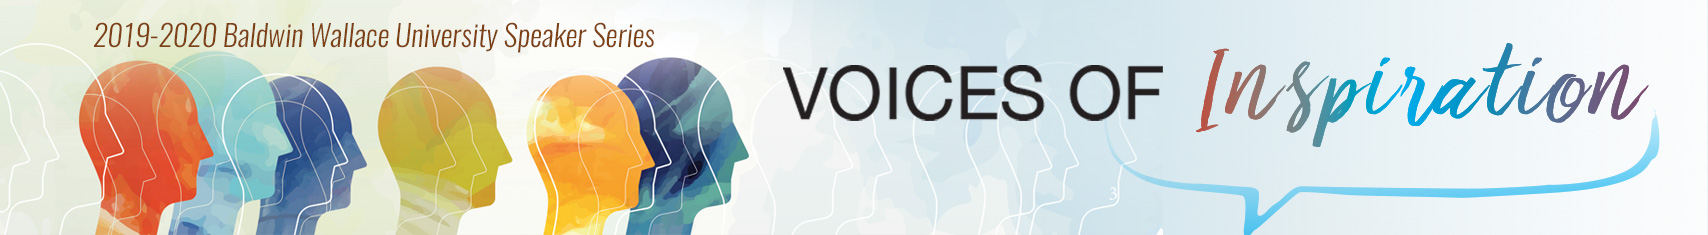 Voices of Imagination and Innovation photo banner